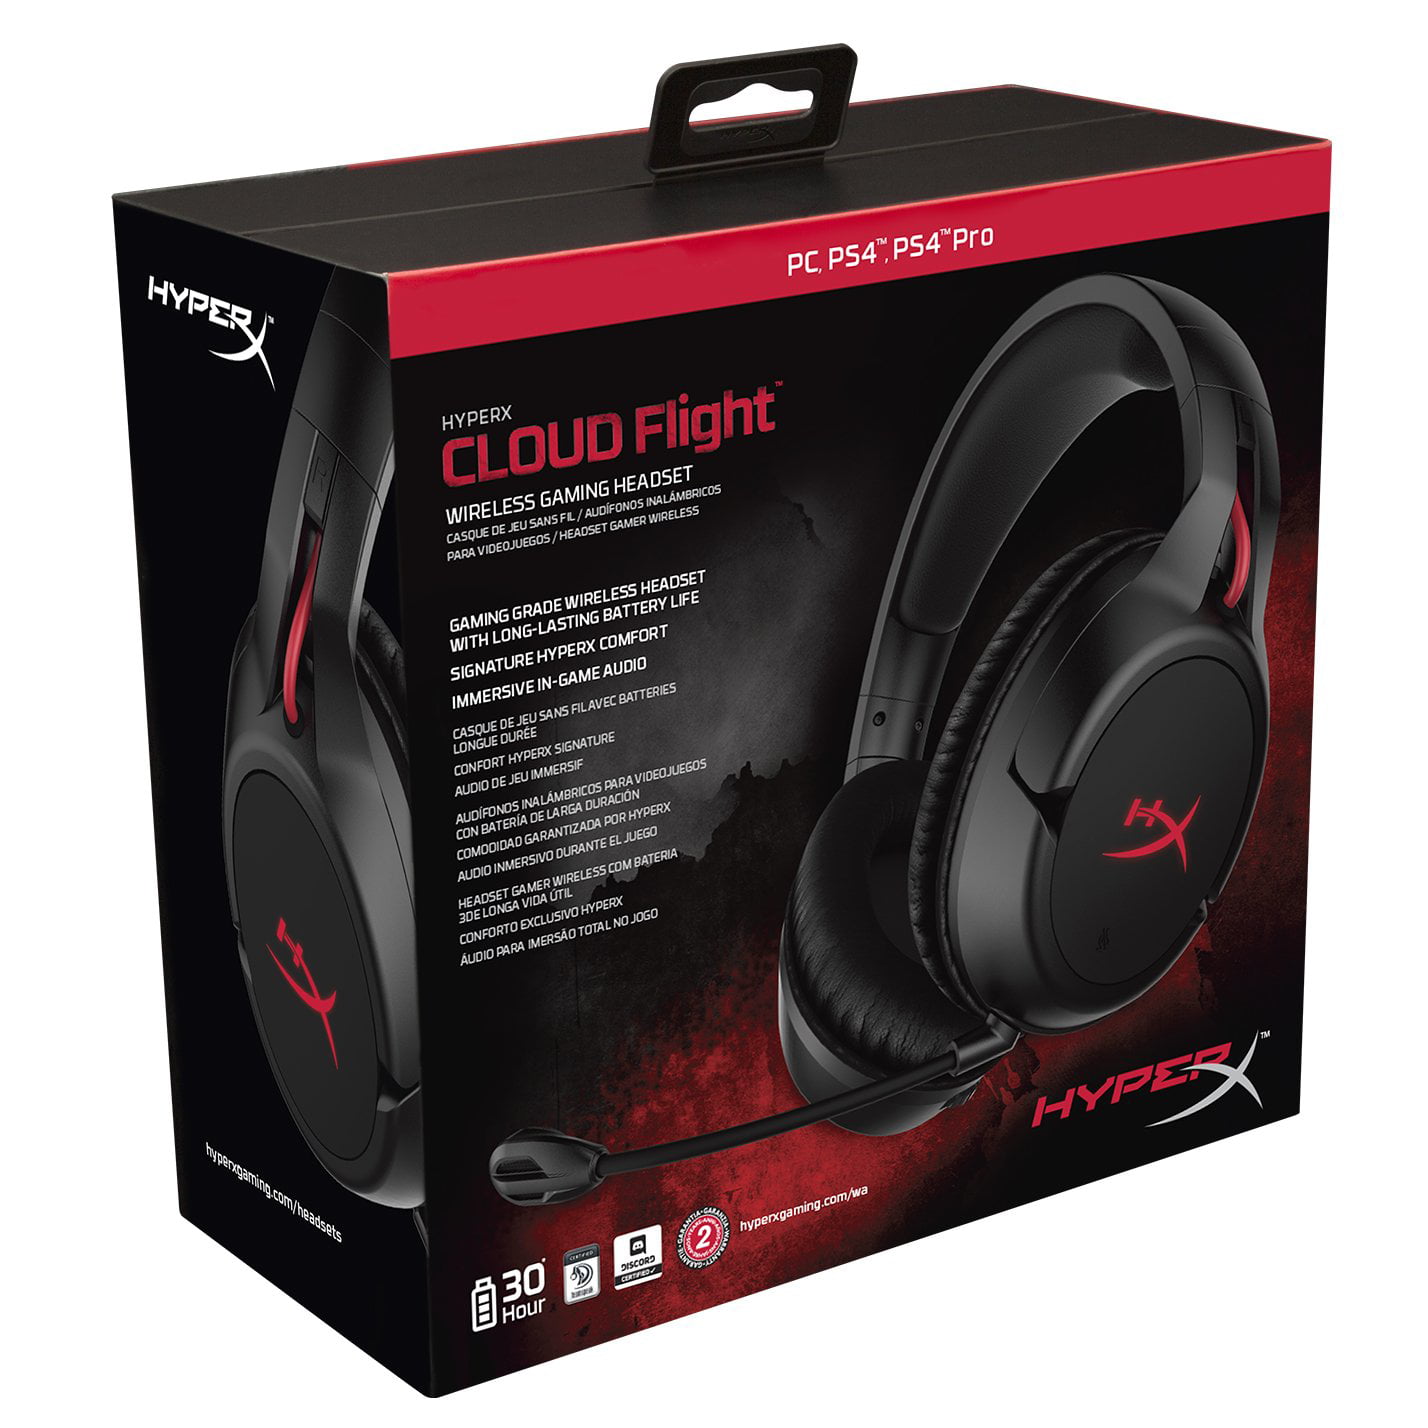 HyperX Cloud Flight - Wireless Gaming Headset, with Long Lasting 